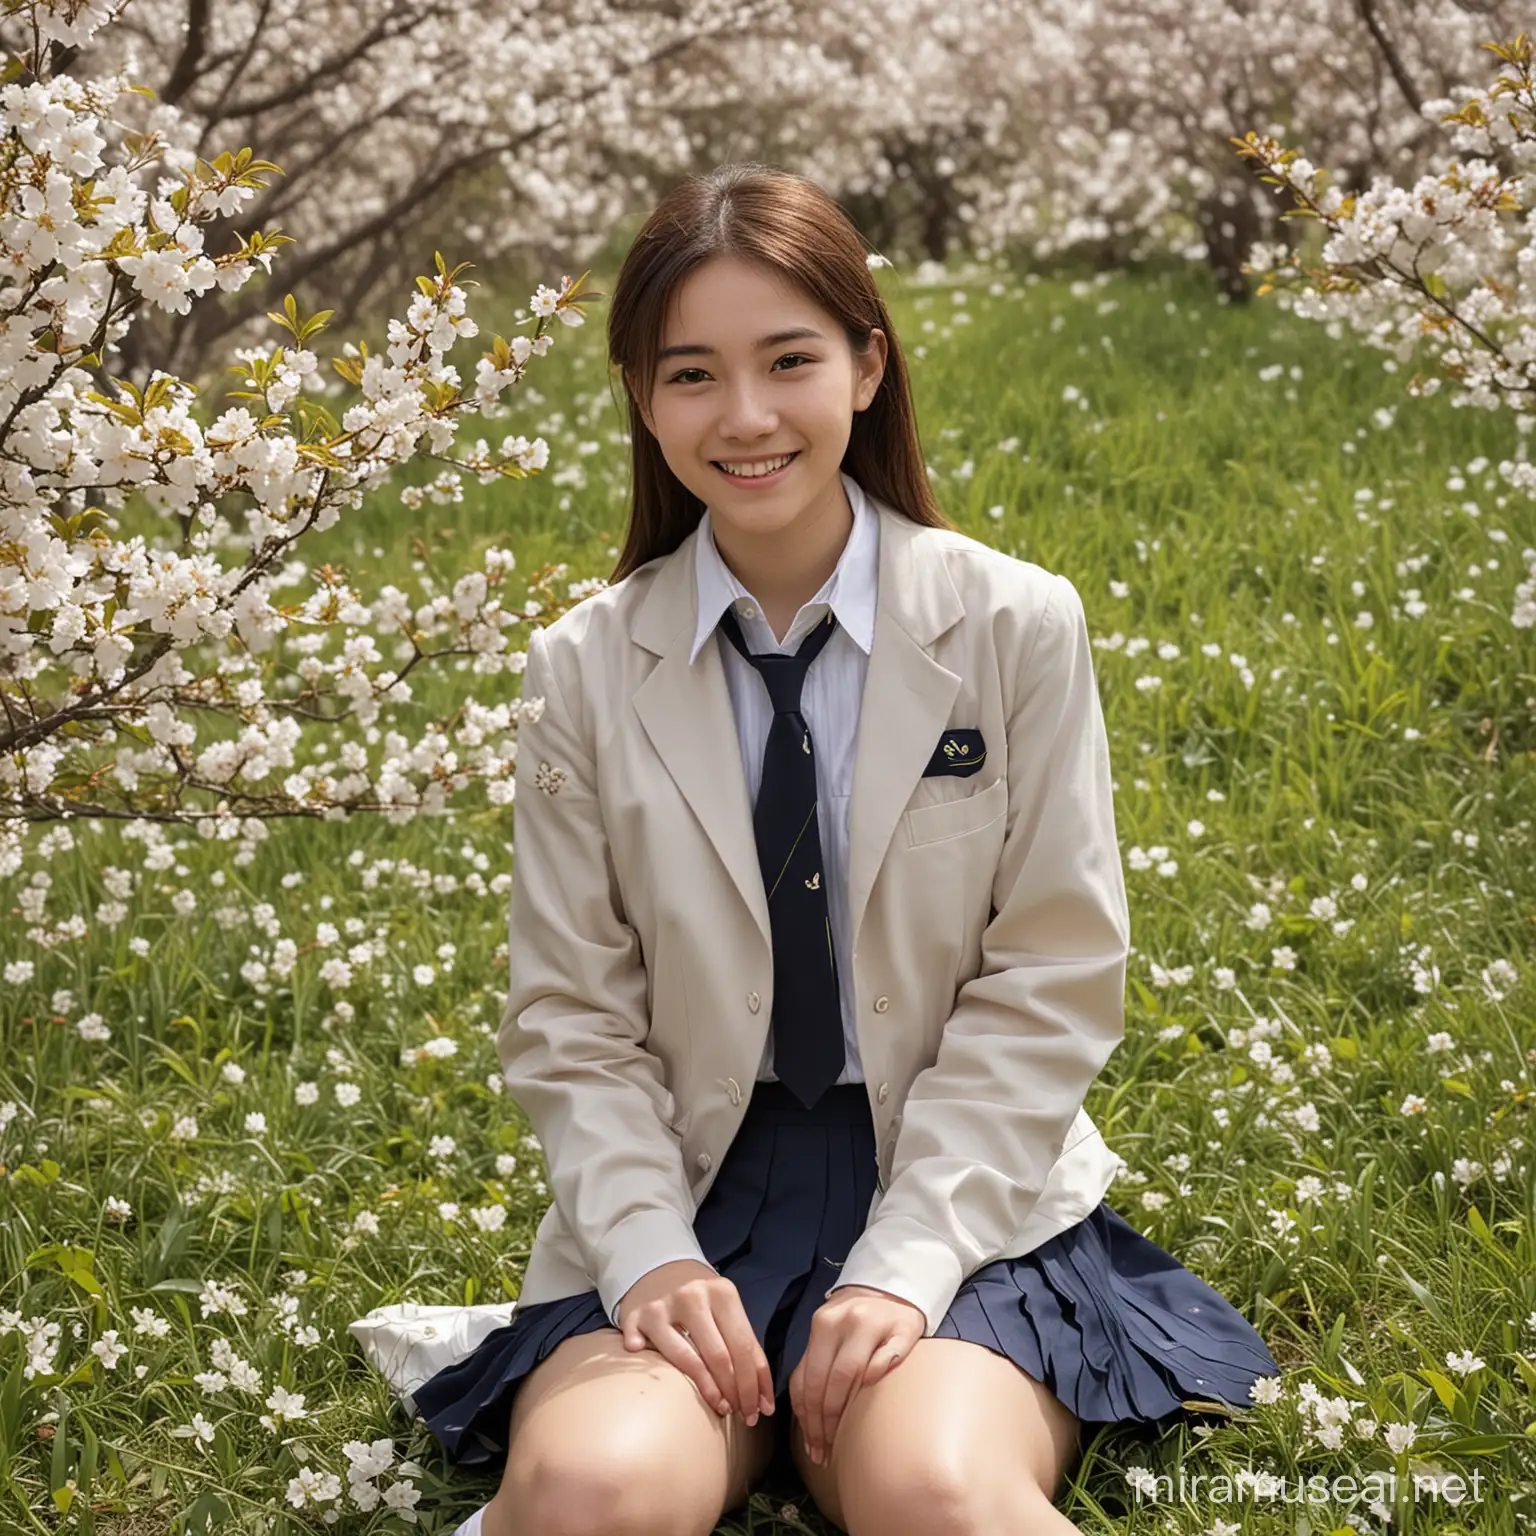 Happy Young Female Student in School Uniform Enjoying Cherry Blossoms by the Riverbank